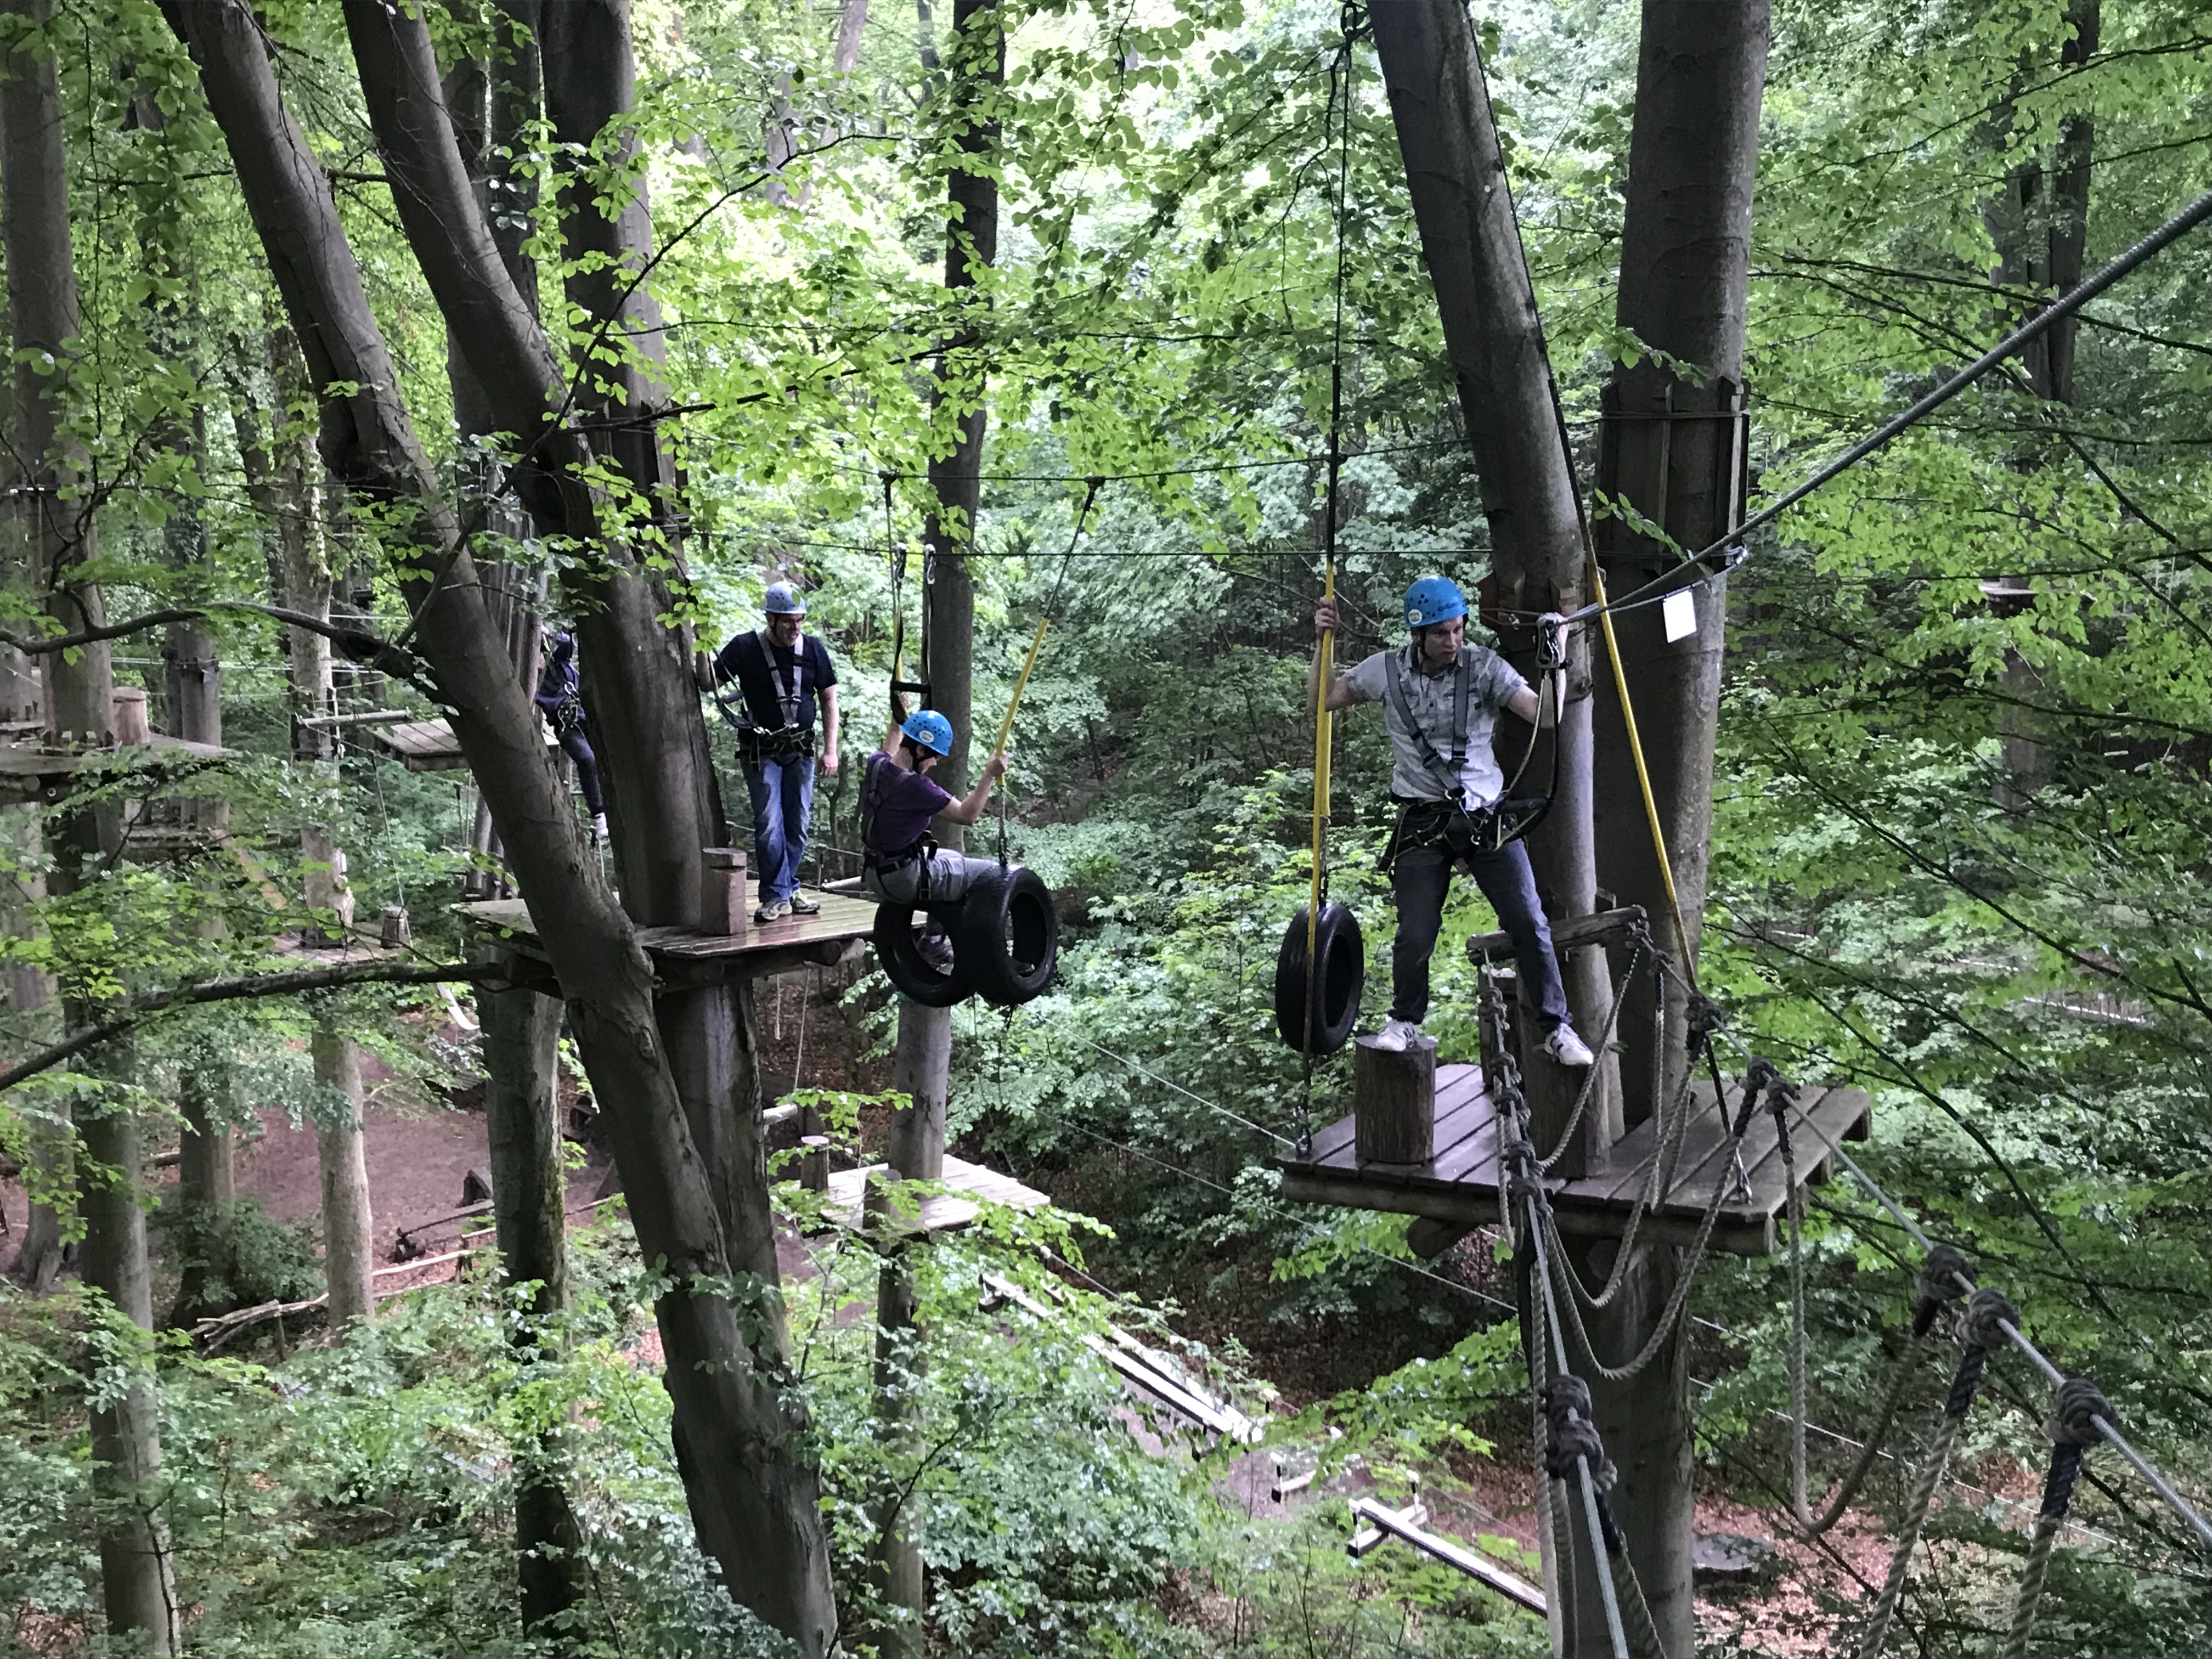 Mastering the high rope garden